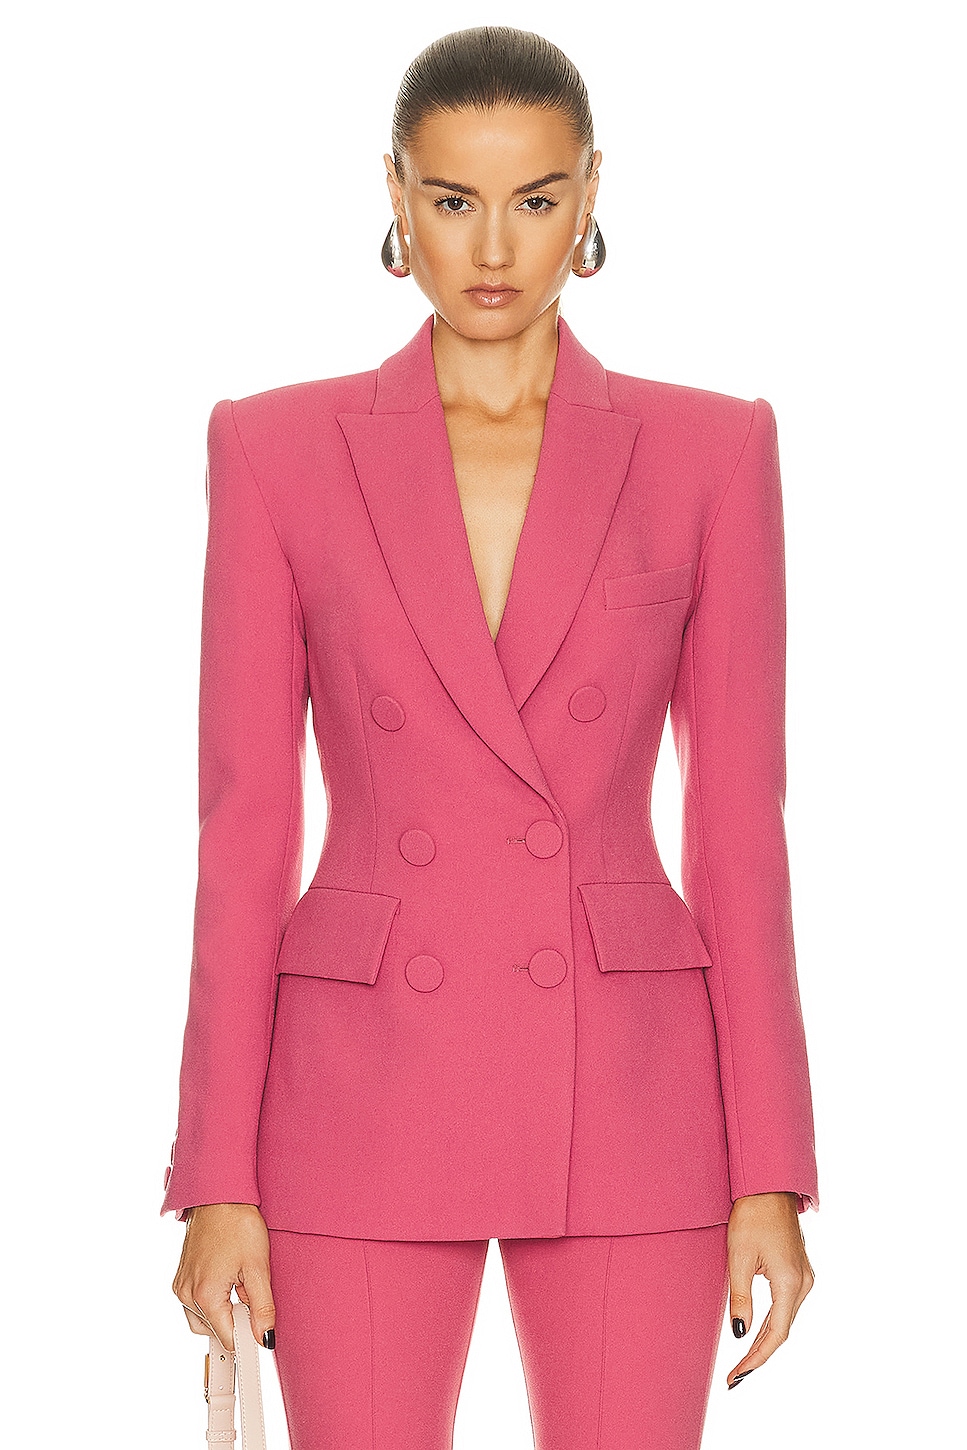 Image 1 of Alex Perry Fitted Double Breasted Blazer in Garnet Rose